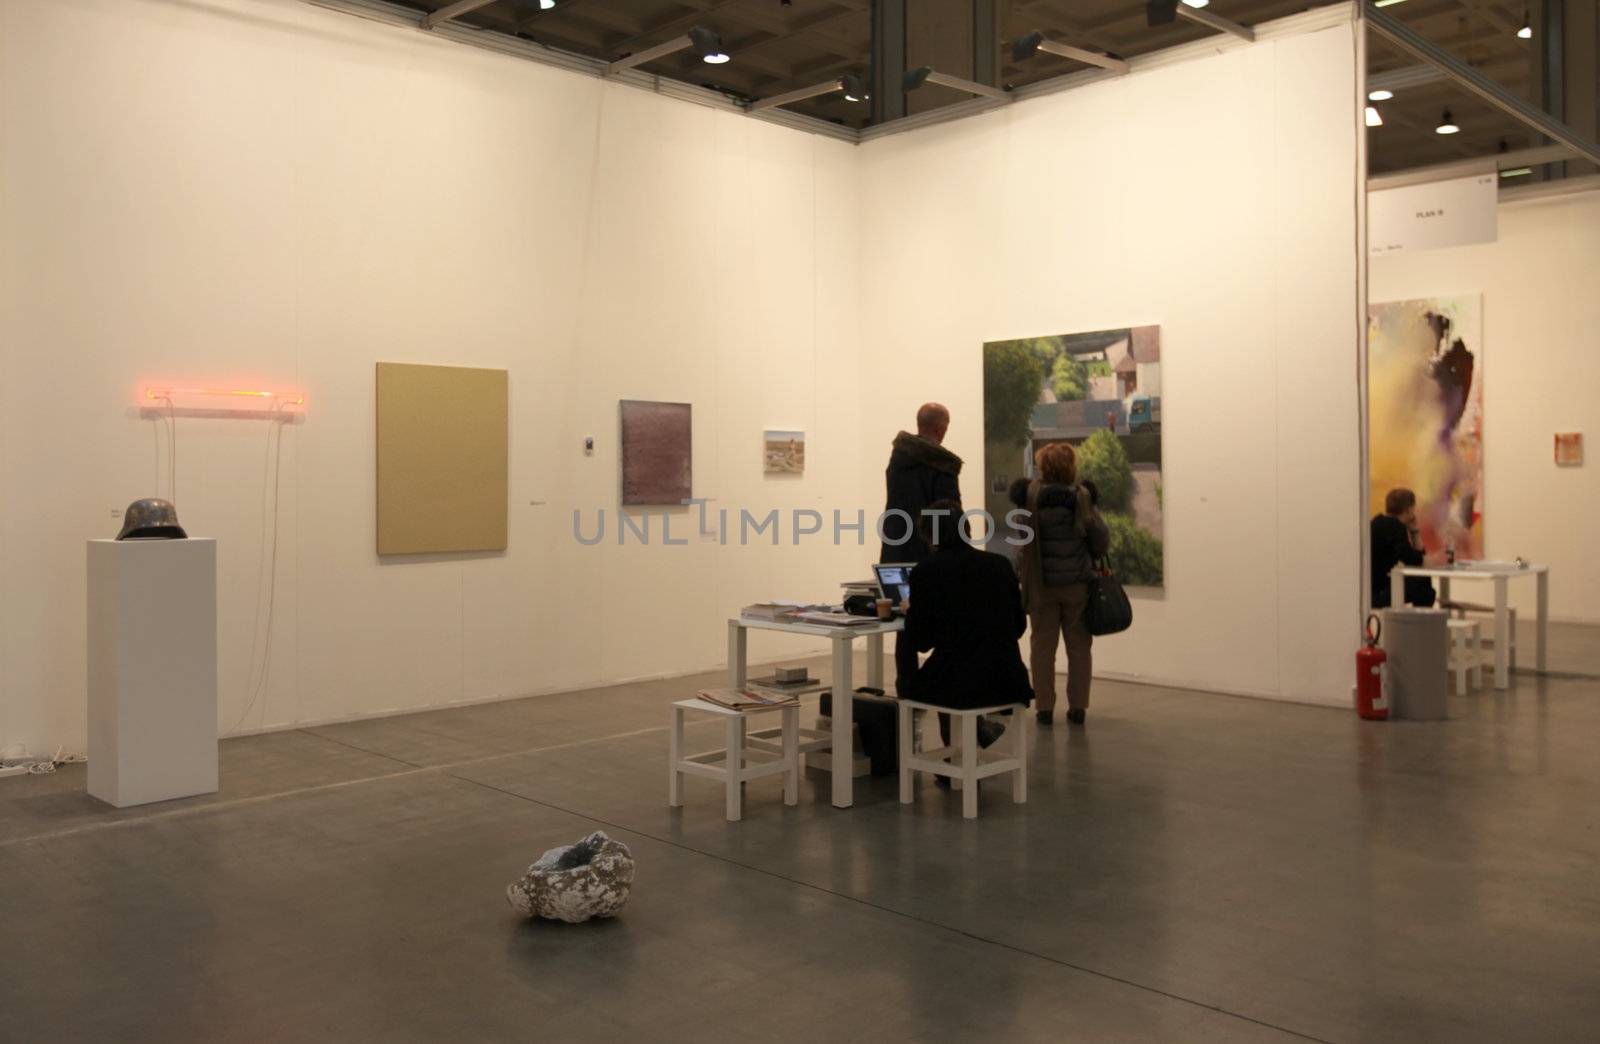 People visit paintings gallery at MiArt, international exhibition of modern and contemporary art April 07, 2013 in Milan, Italy.